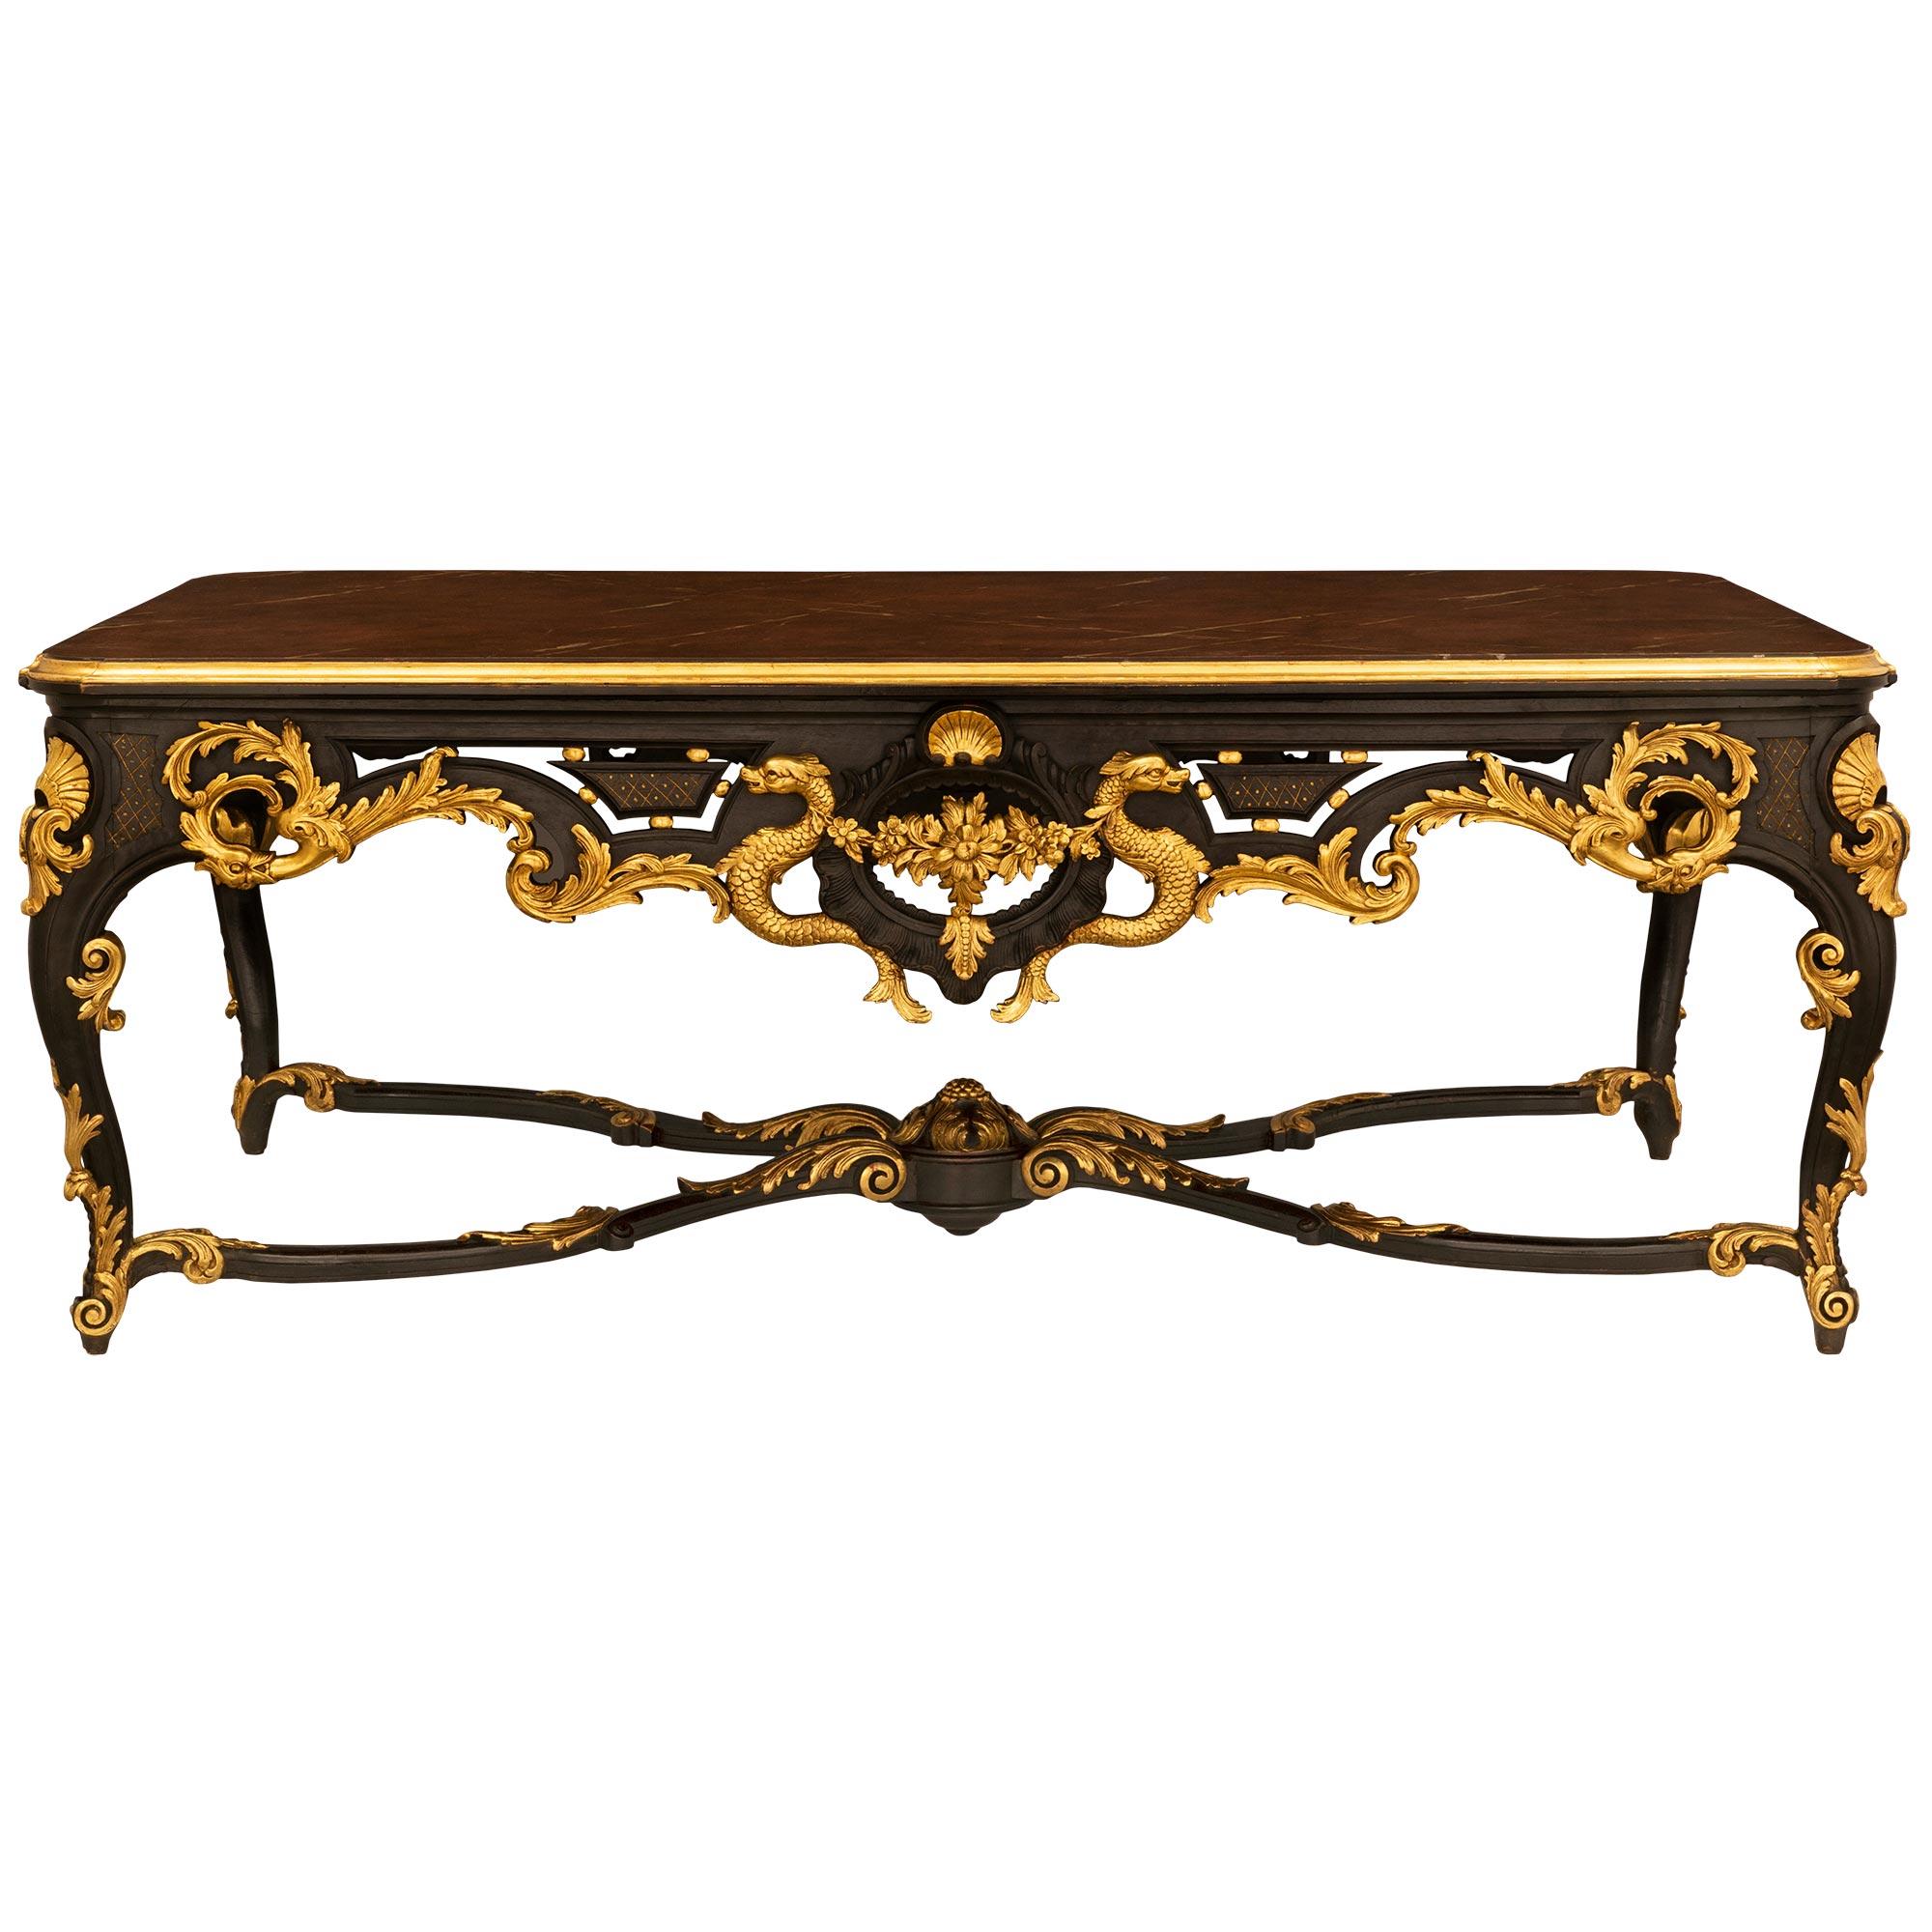 French 19th Century Louis XV Style Ebonized Fruitwood and Giltwood Center Table In Good Condition For Sale In West Palm Beach, FL